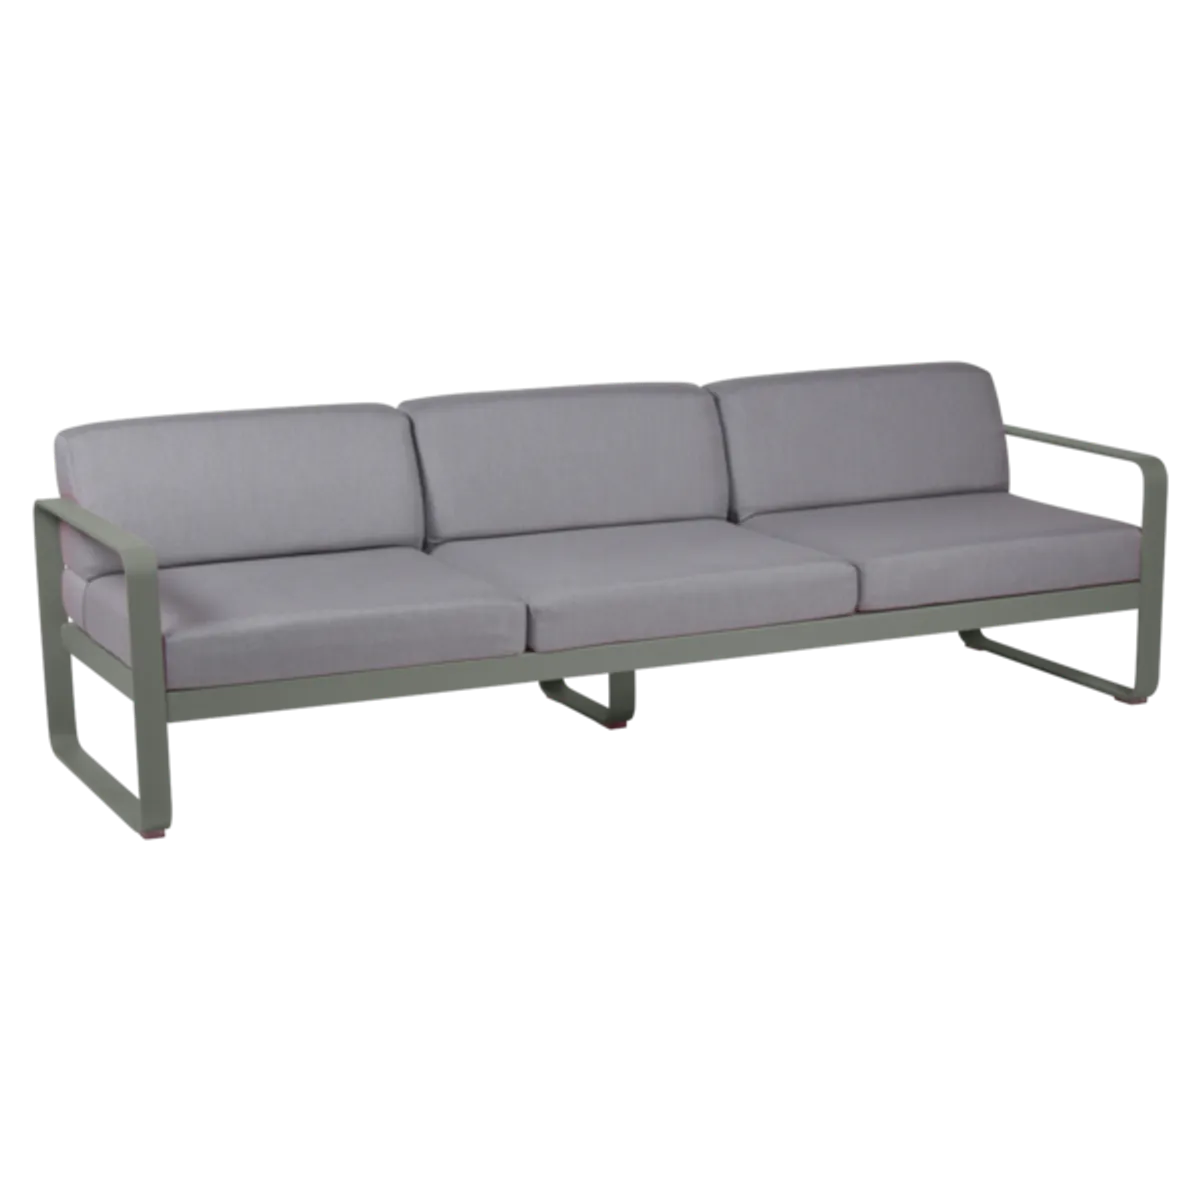 Bellevie 3 Seater Flannelgrey Cushions Inside Out Contracts